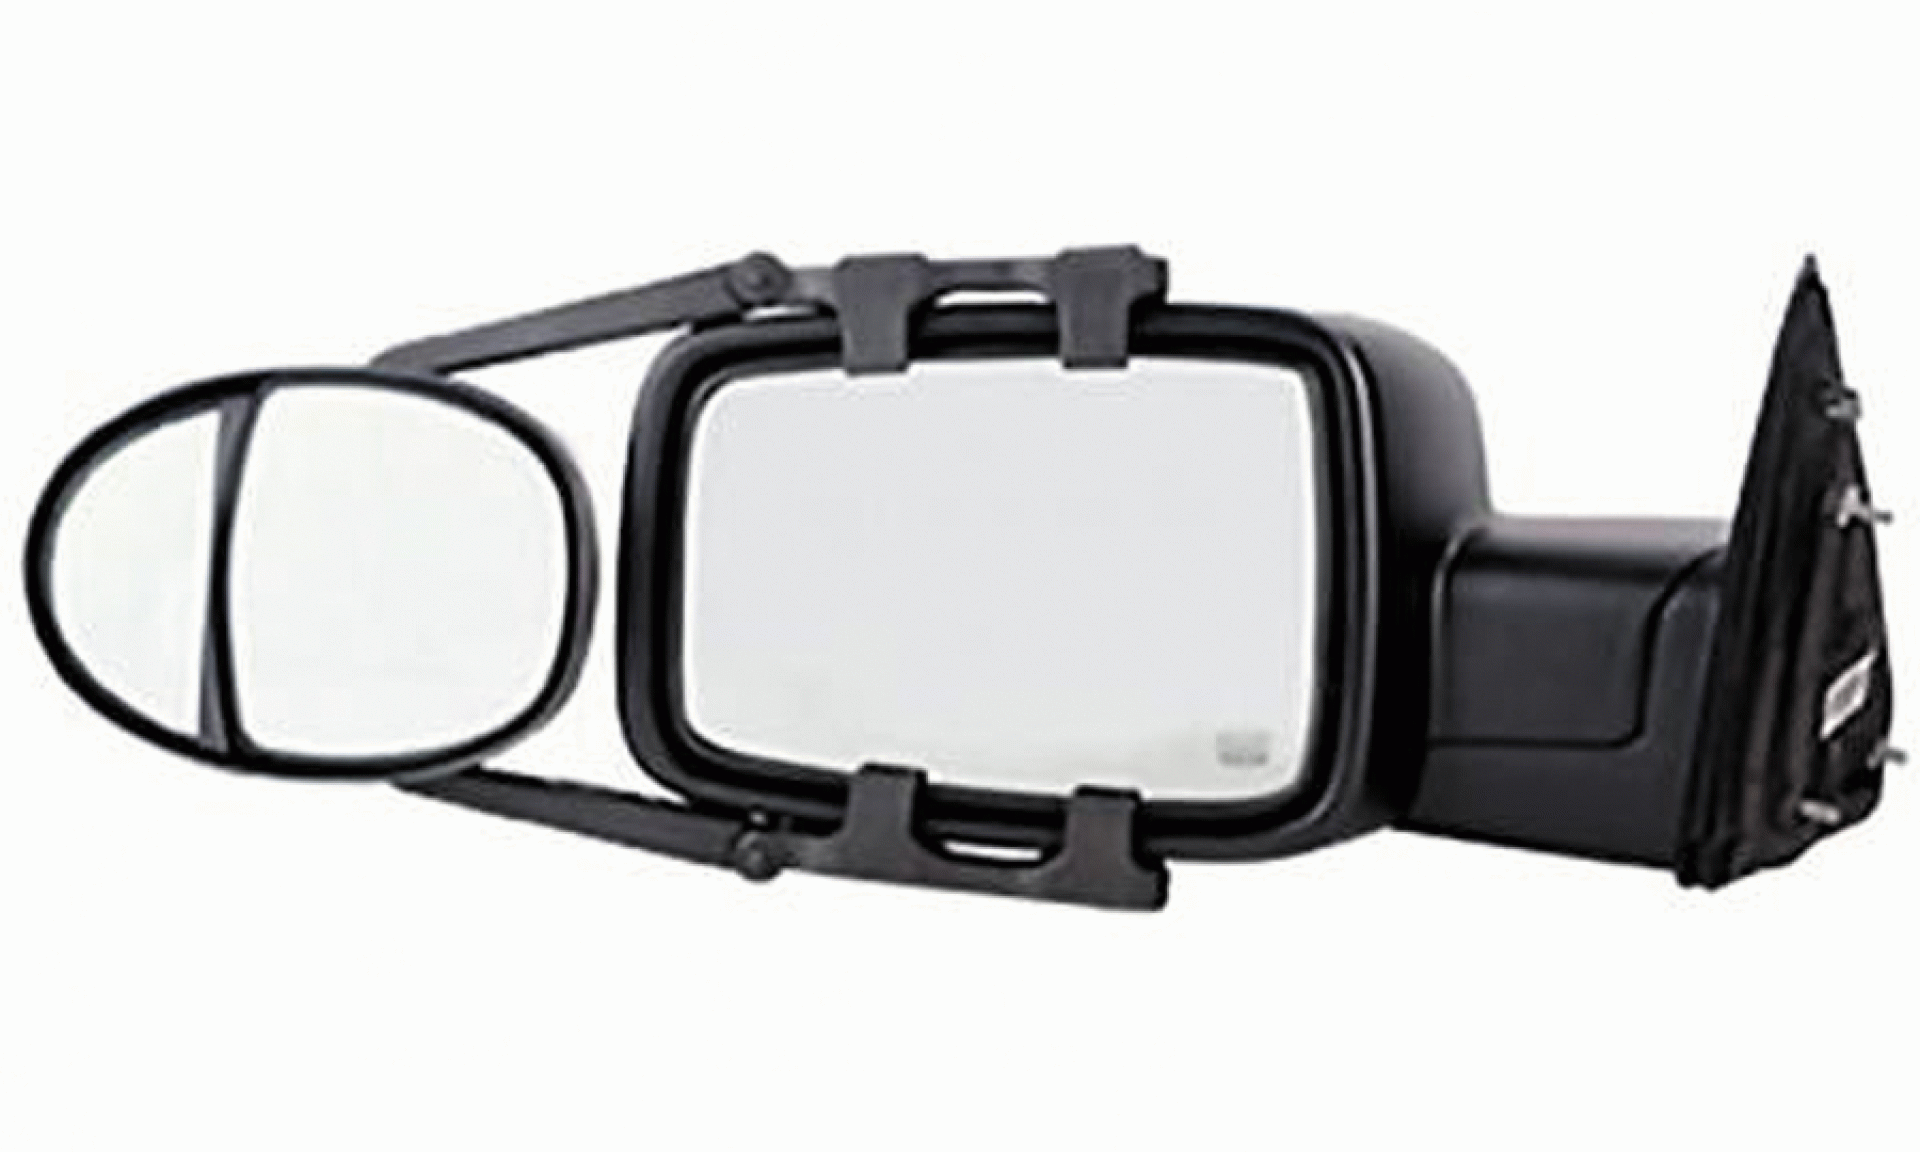 K Source | 3990 | Dual Lens Towing Mirror with Ratchet Mount System Pair 5"